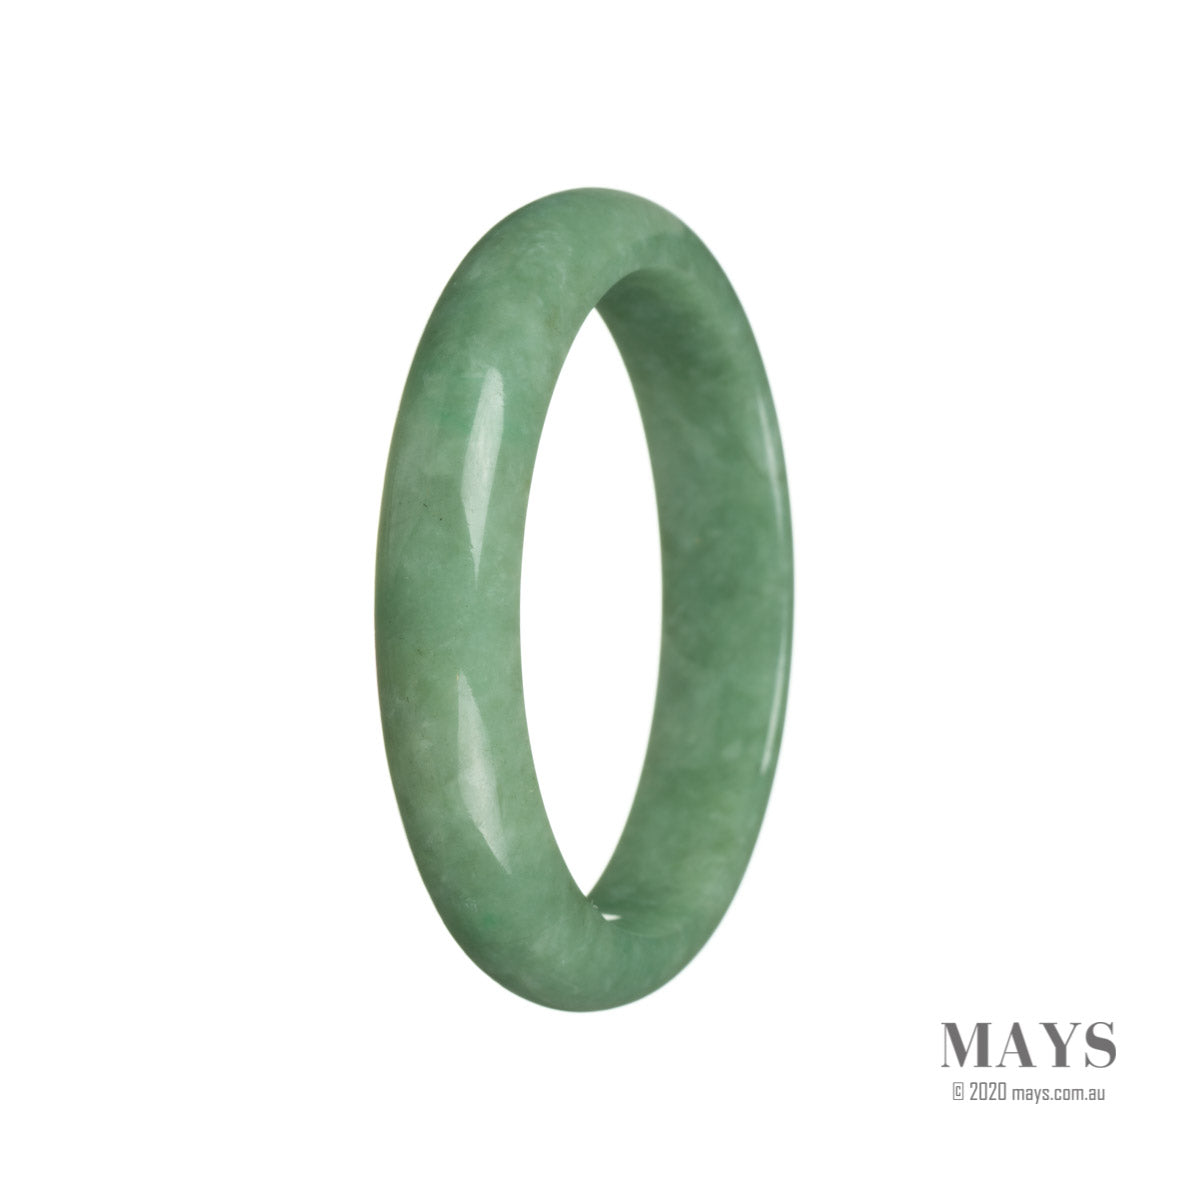 A close-up photo of a stunning green Burmese Jade bangle bracelet with a half-moon shape, measuring 58mm in diameter. The smooth and glossy surface showcases the high quality of the Grade A jade, reflecting light beautifully. The bracelet is a timeless piece of jewelry that exudes elegance and sophistication. Perfect for adding a touch of luxury to any outfit.